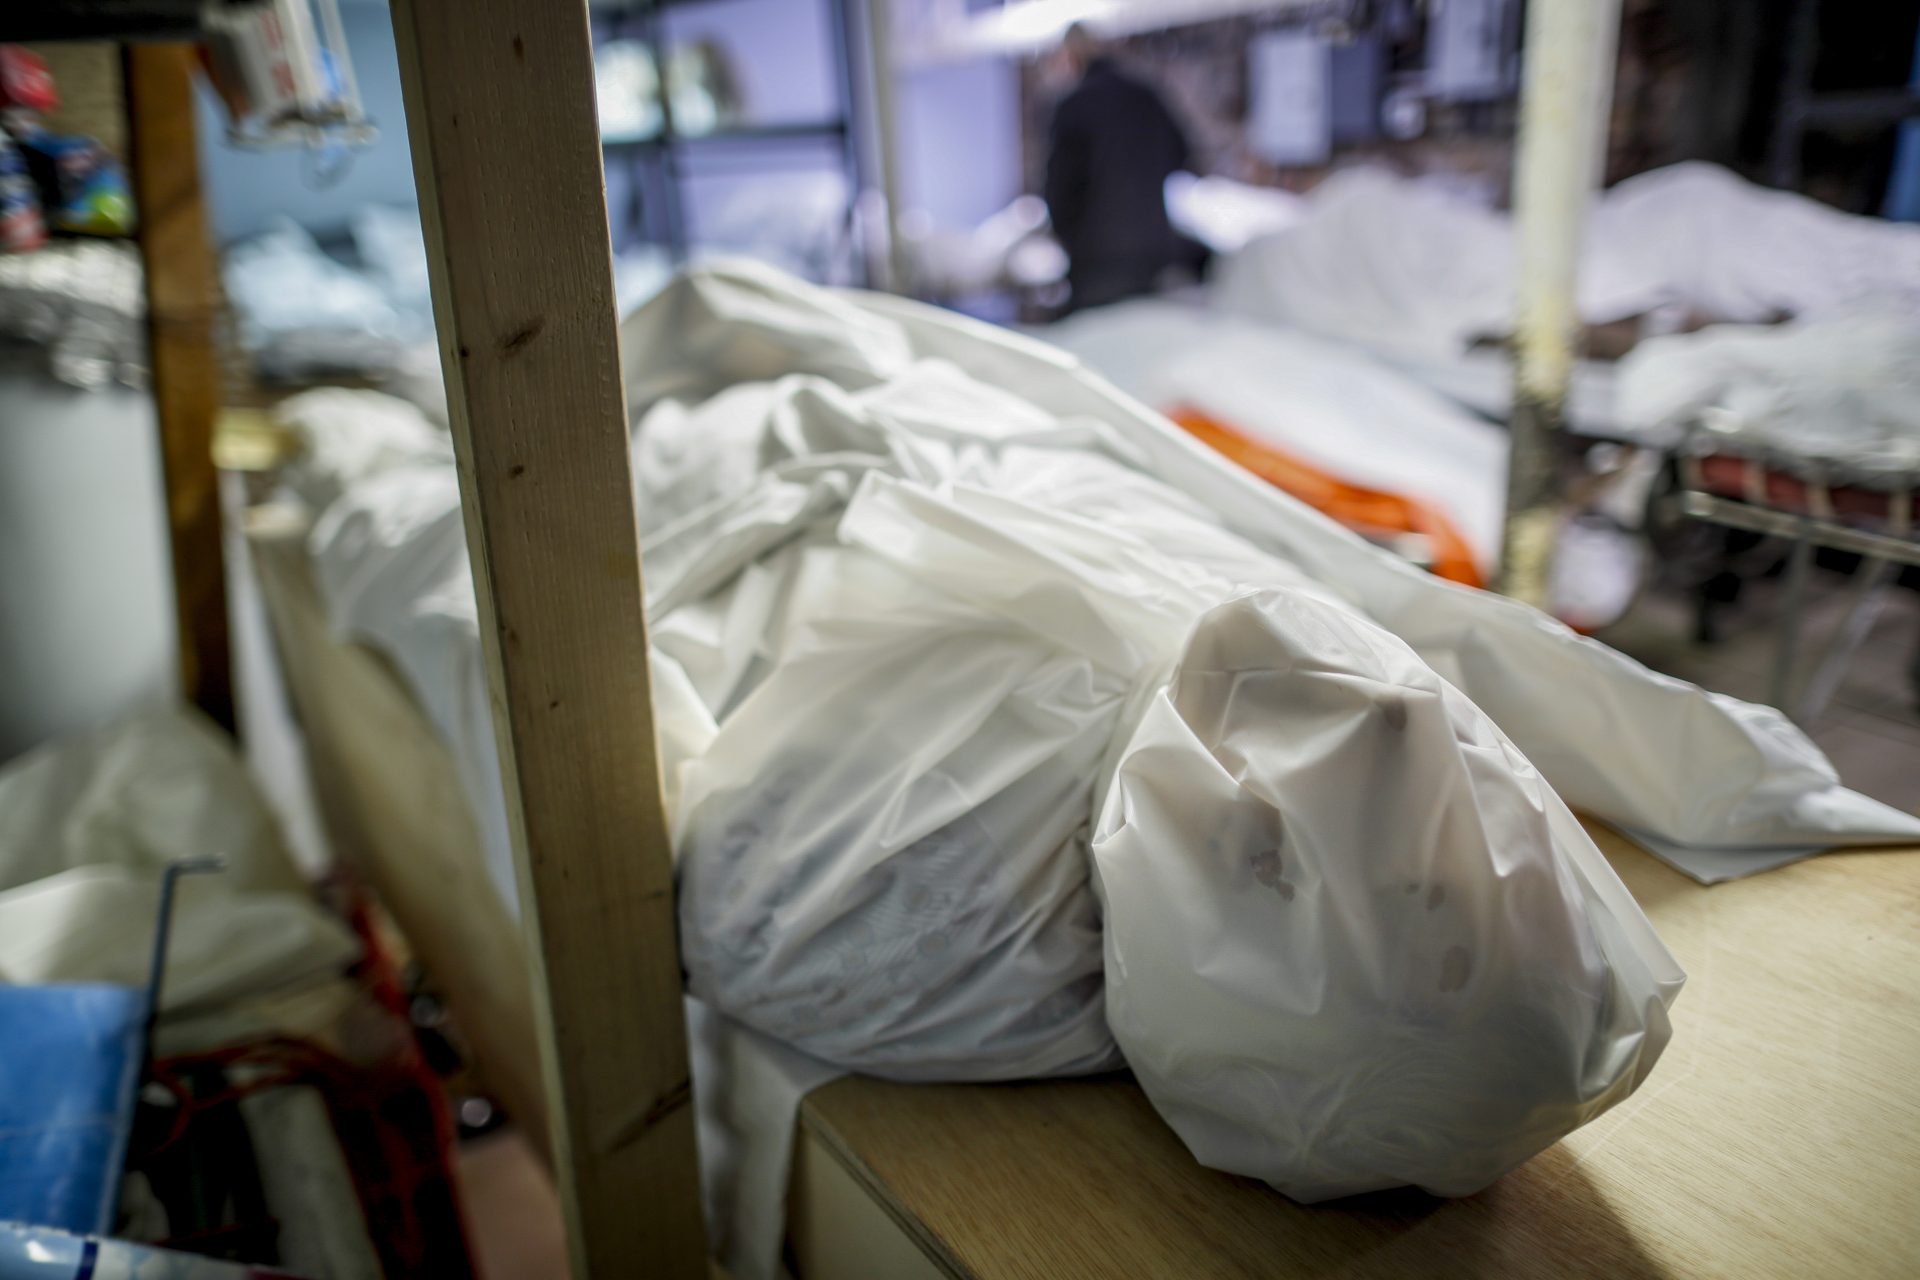 Bodies are wrapped in protective plastic in a holding facility at Daniel J. Schaefer Funeral Home, Thursday, April 2, 2020, in the Brooklyn borough of New York. The company is equipped to handle 40-60 cases at a time. But amid the coronavirus pandemic, it was taking care of 185 Thursday morning.